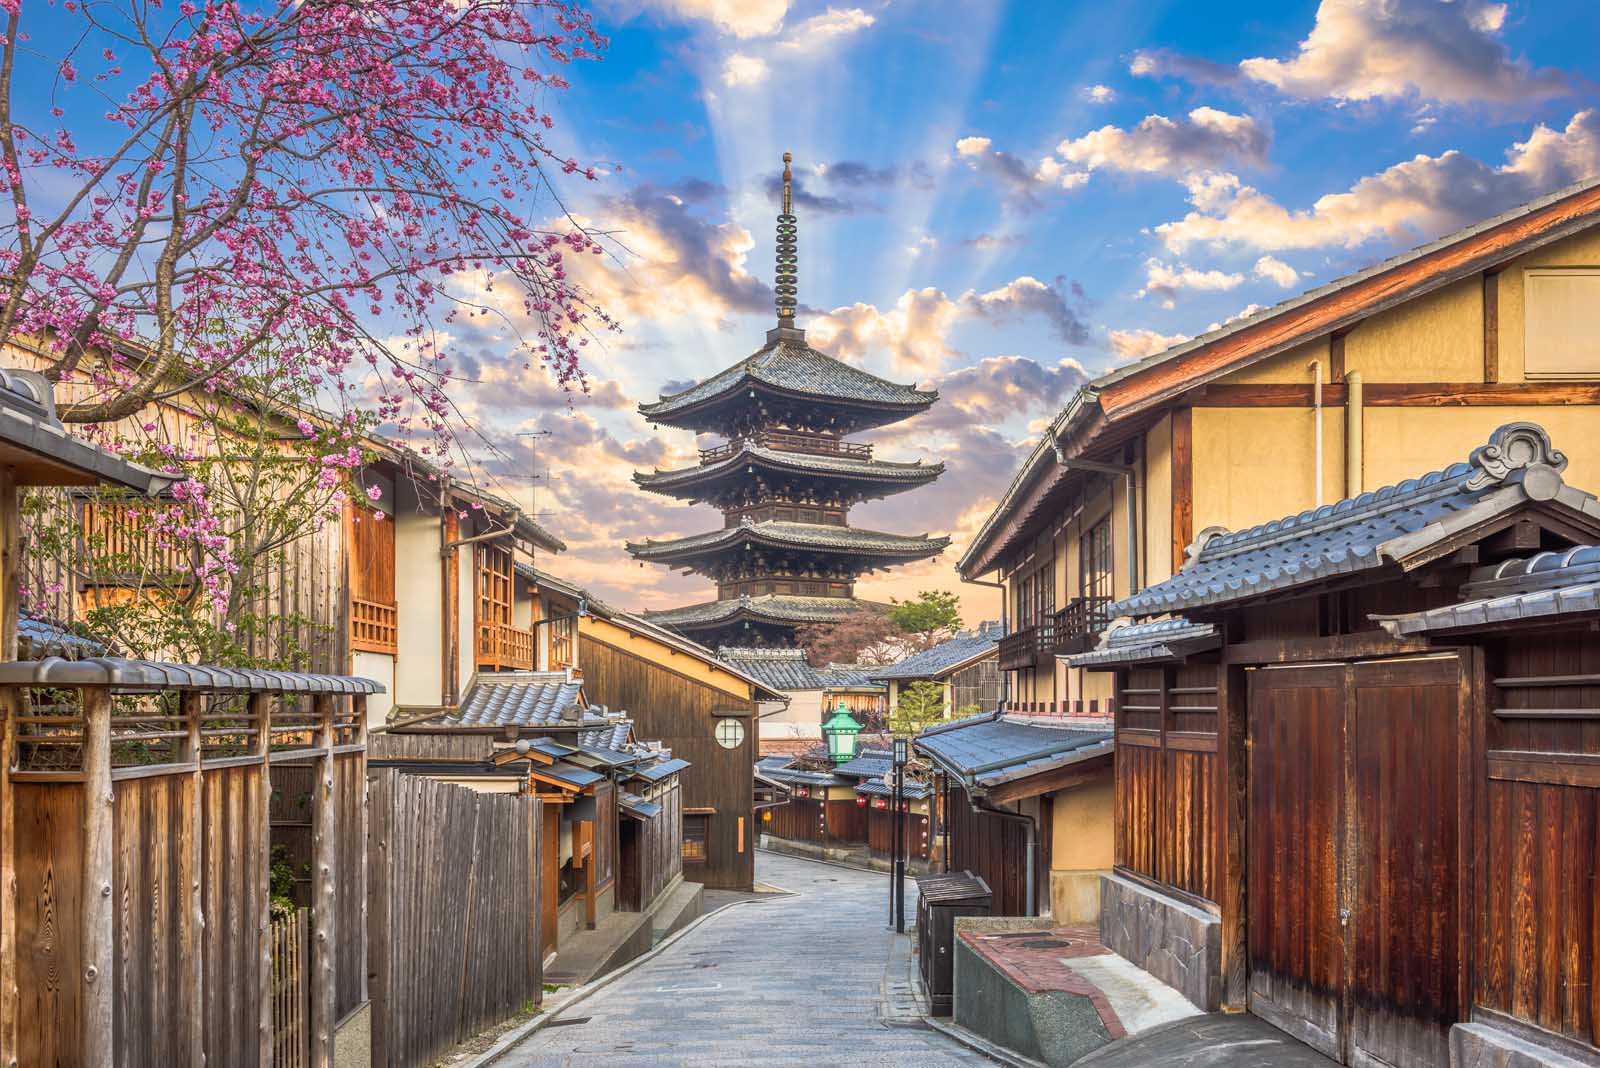 Top Things to do in Kyoto Japan